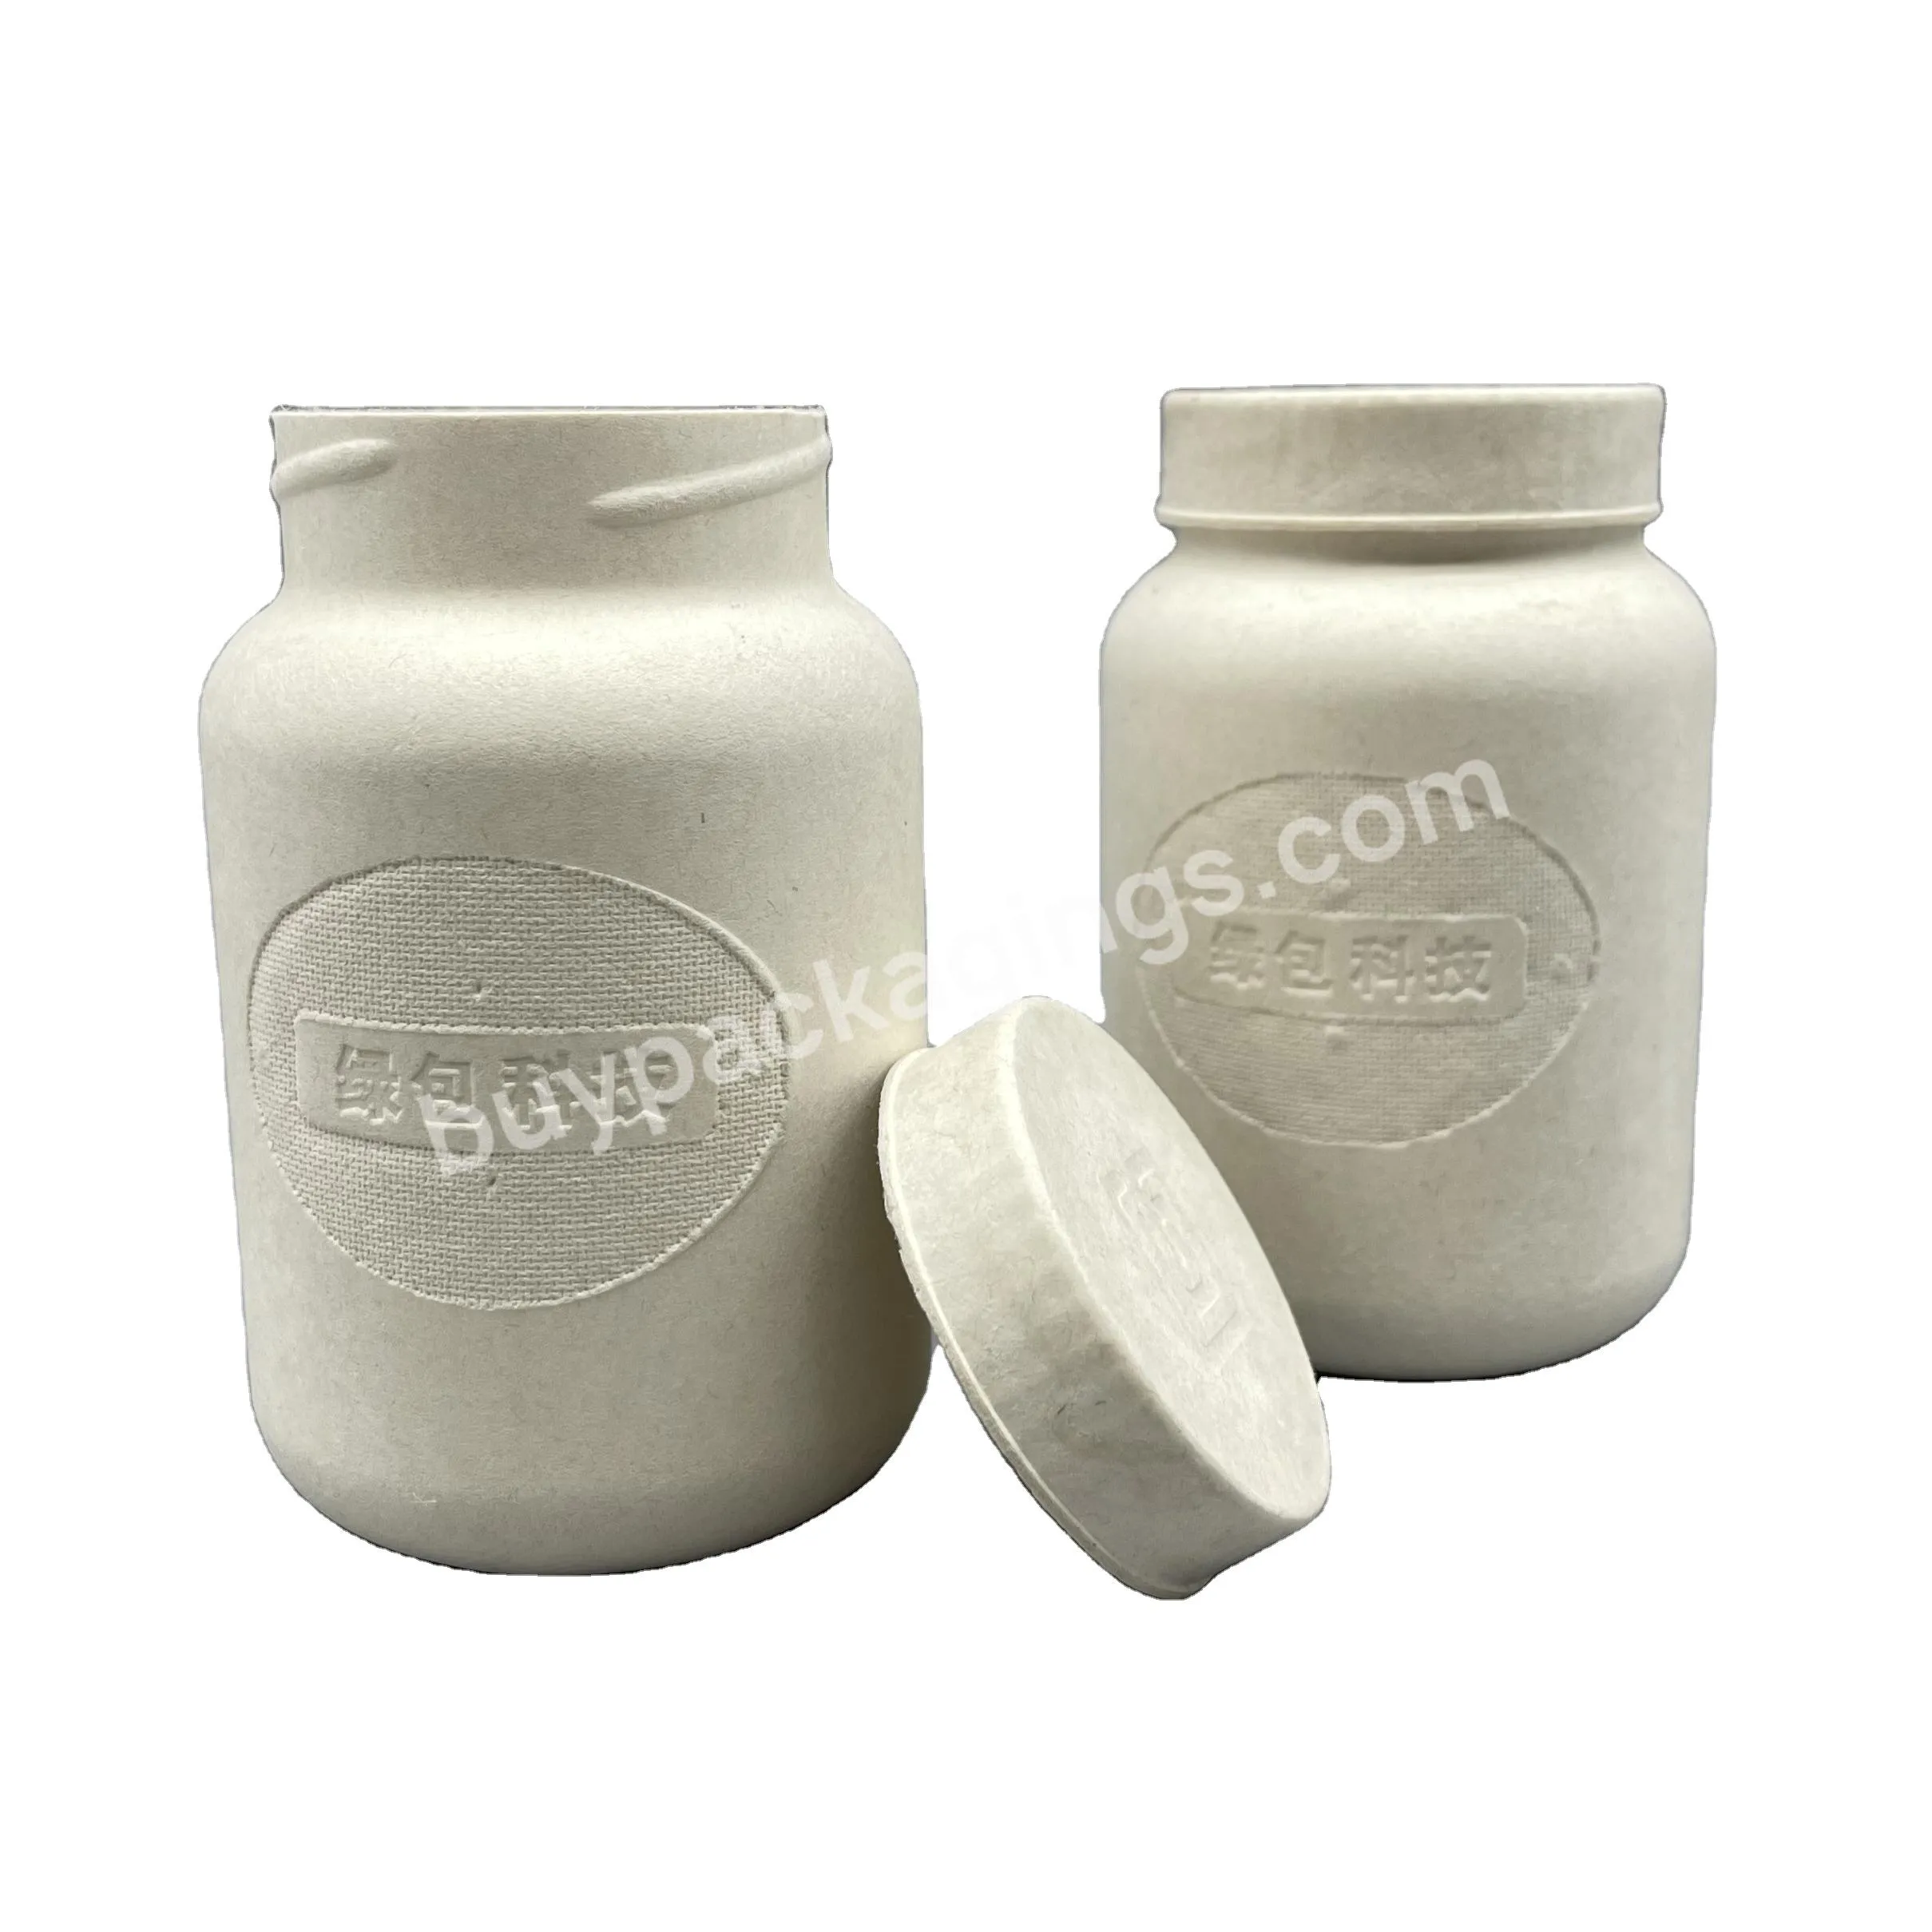 Biodergrable Medicine Process Type Paper Pulp Molded Packaging Industrial Insert Tray - Buy Paper Pulp Molded Medicine Packaging,Molded Pulp Industrial Insert For Medicine,Biodergrable Medicine Paper Pulp Insert Tray.